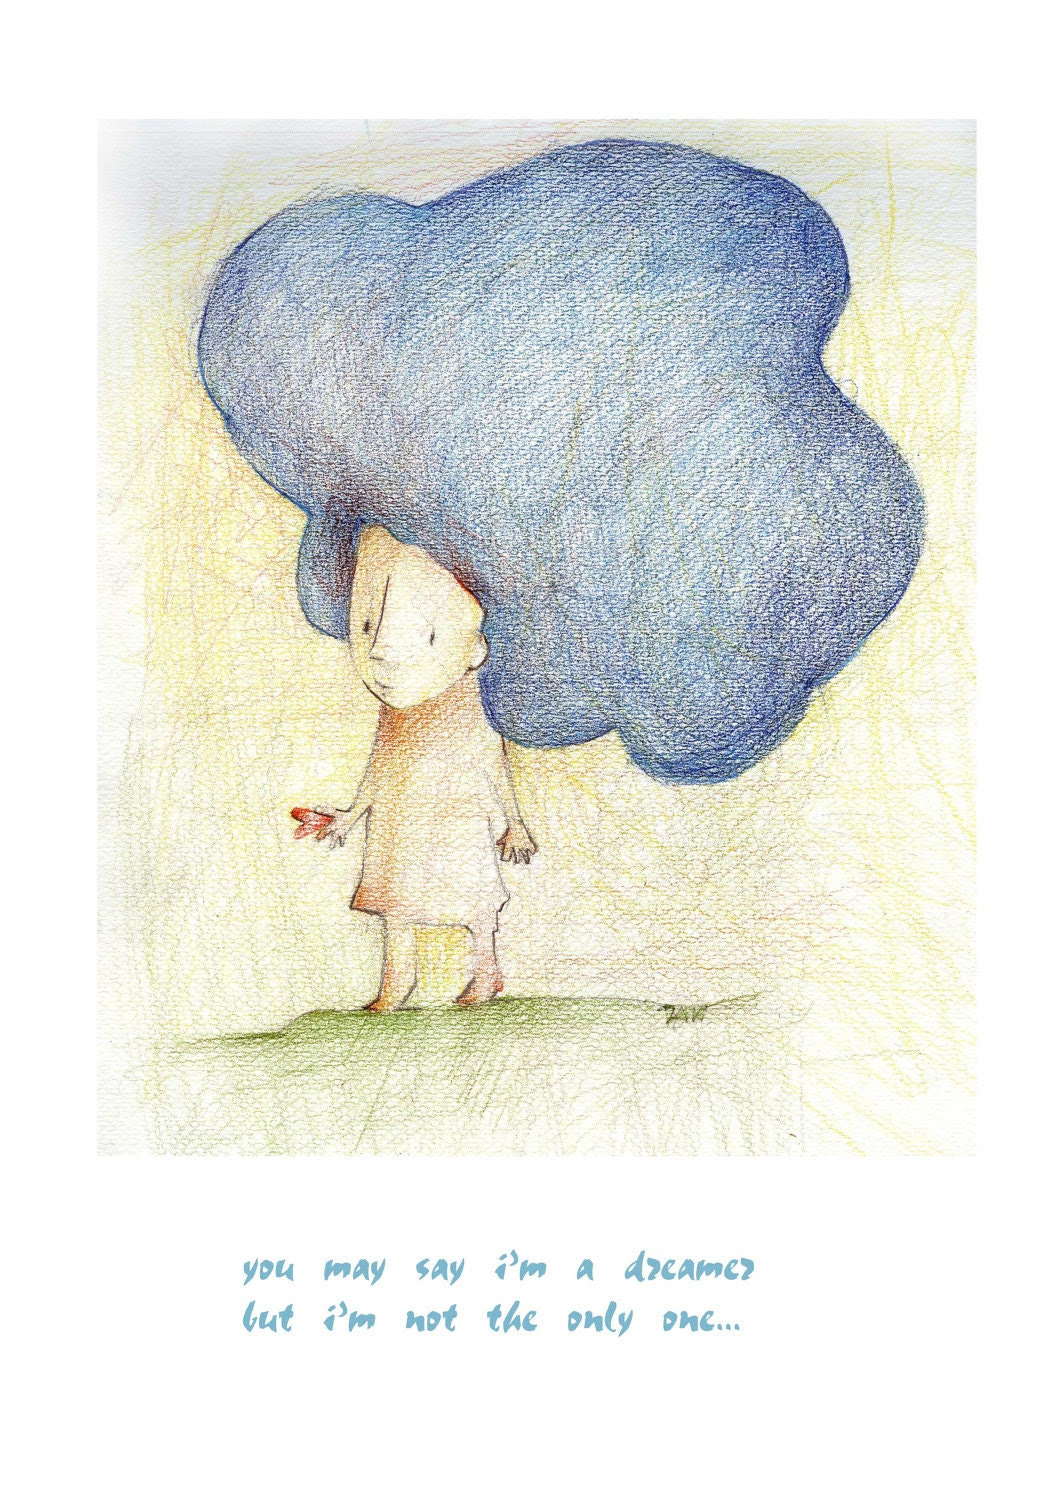 colored pencil drawing - my dreams are so big- childrens print from original HAND PAINTED illustration - illustrationzak